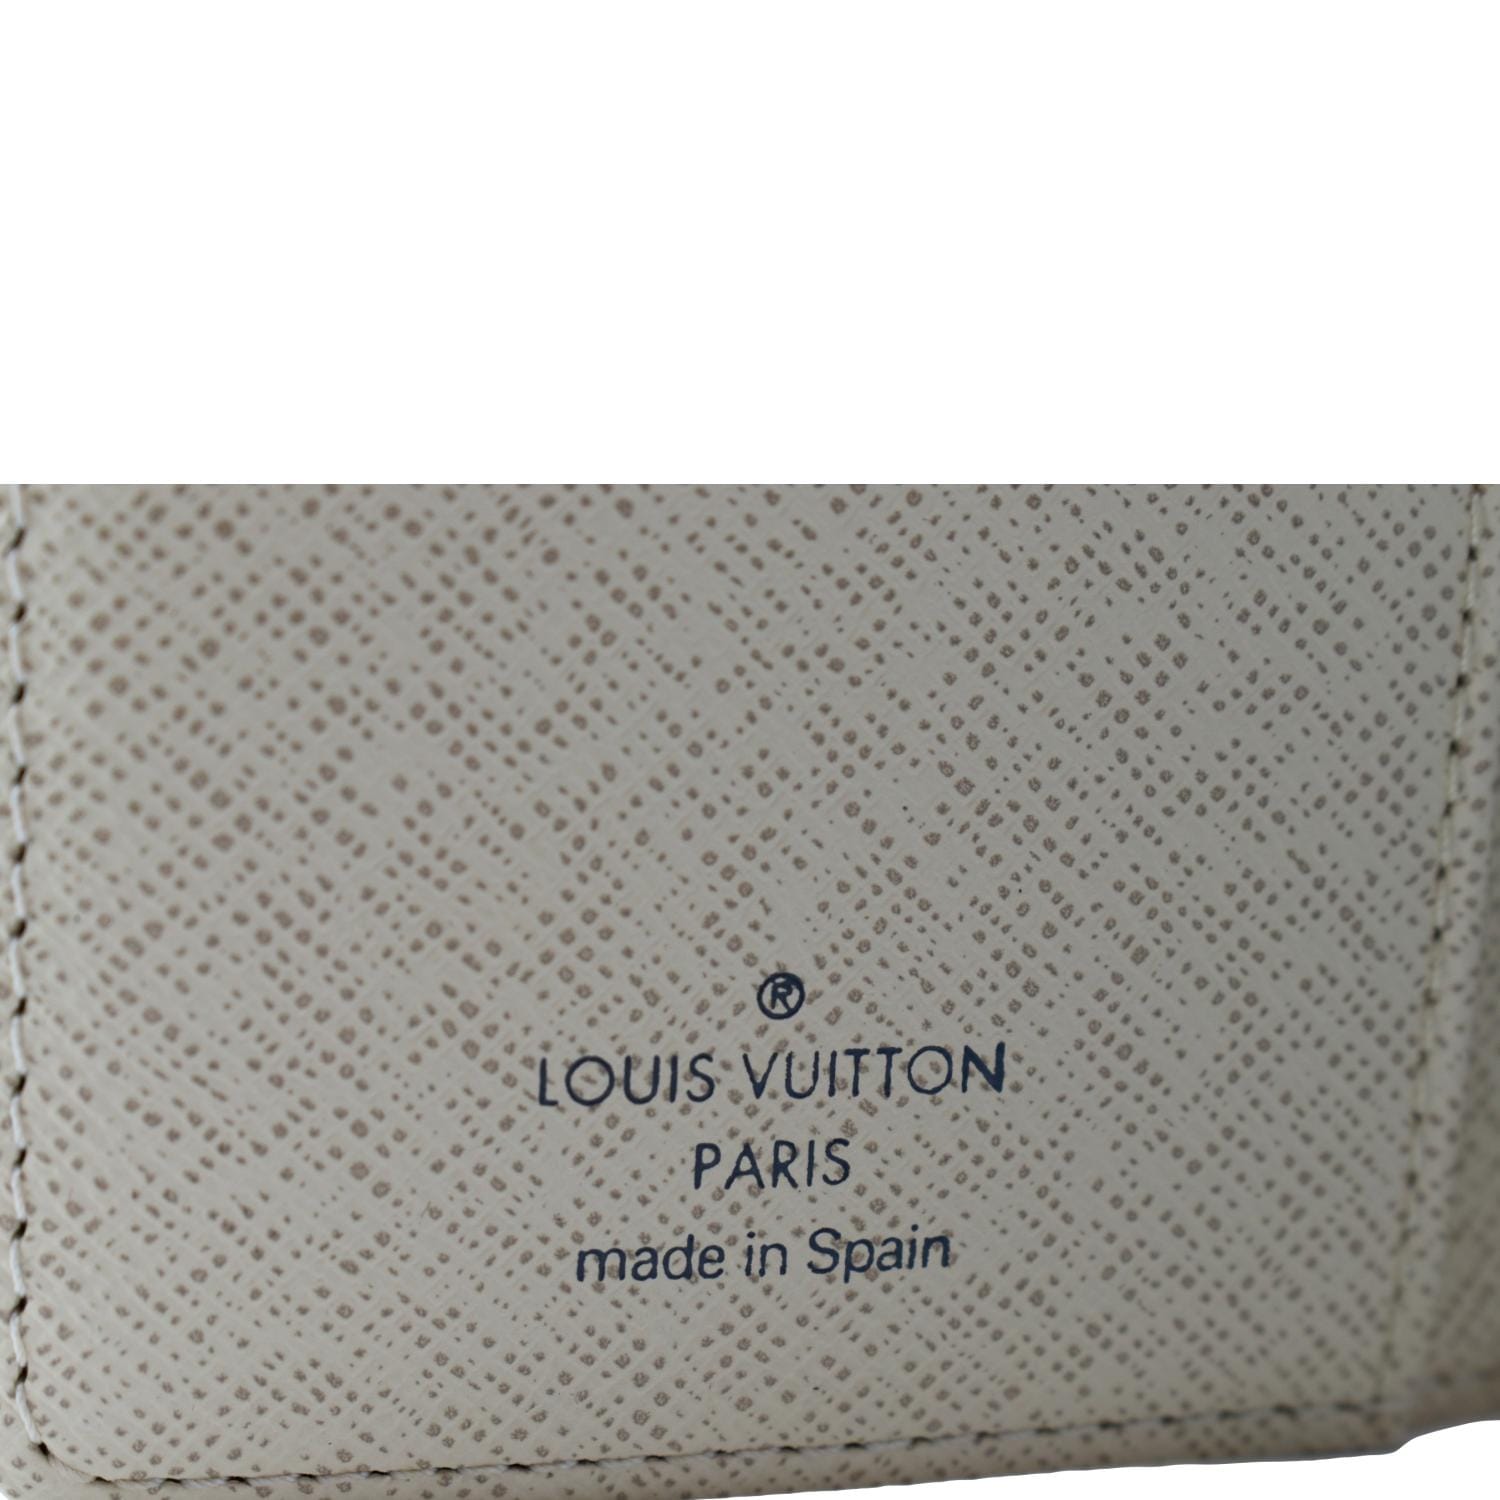 Louis Vuitton medium agenda excellent condition asking $400 comment for  more information or to …